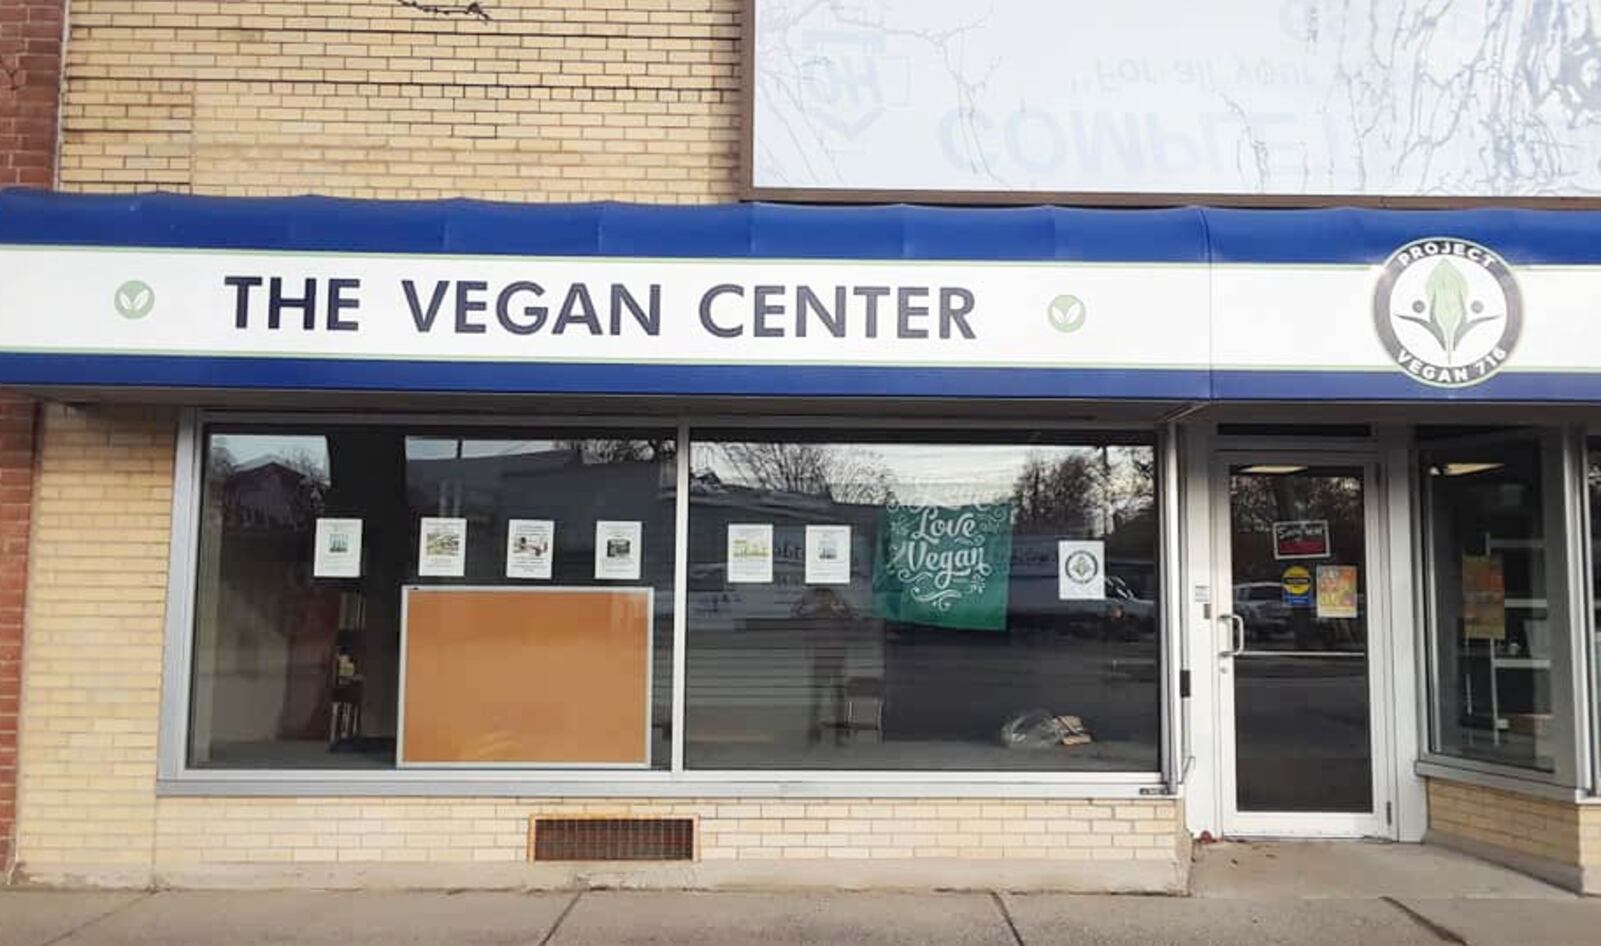 New York State Now Has an All-Vegan Community Center